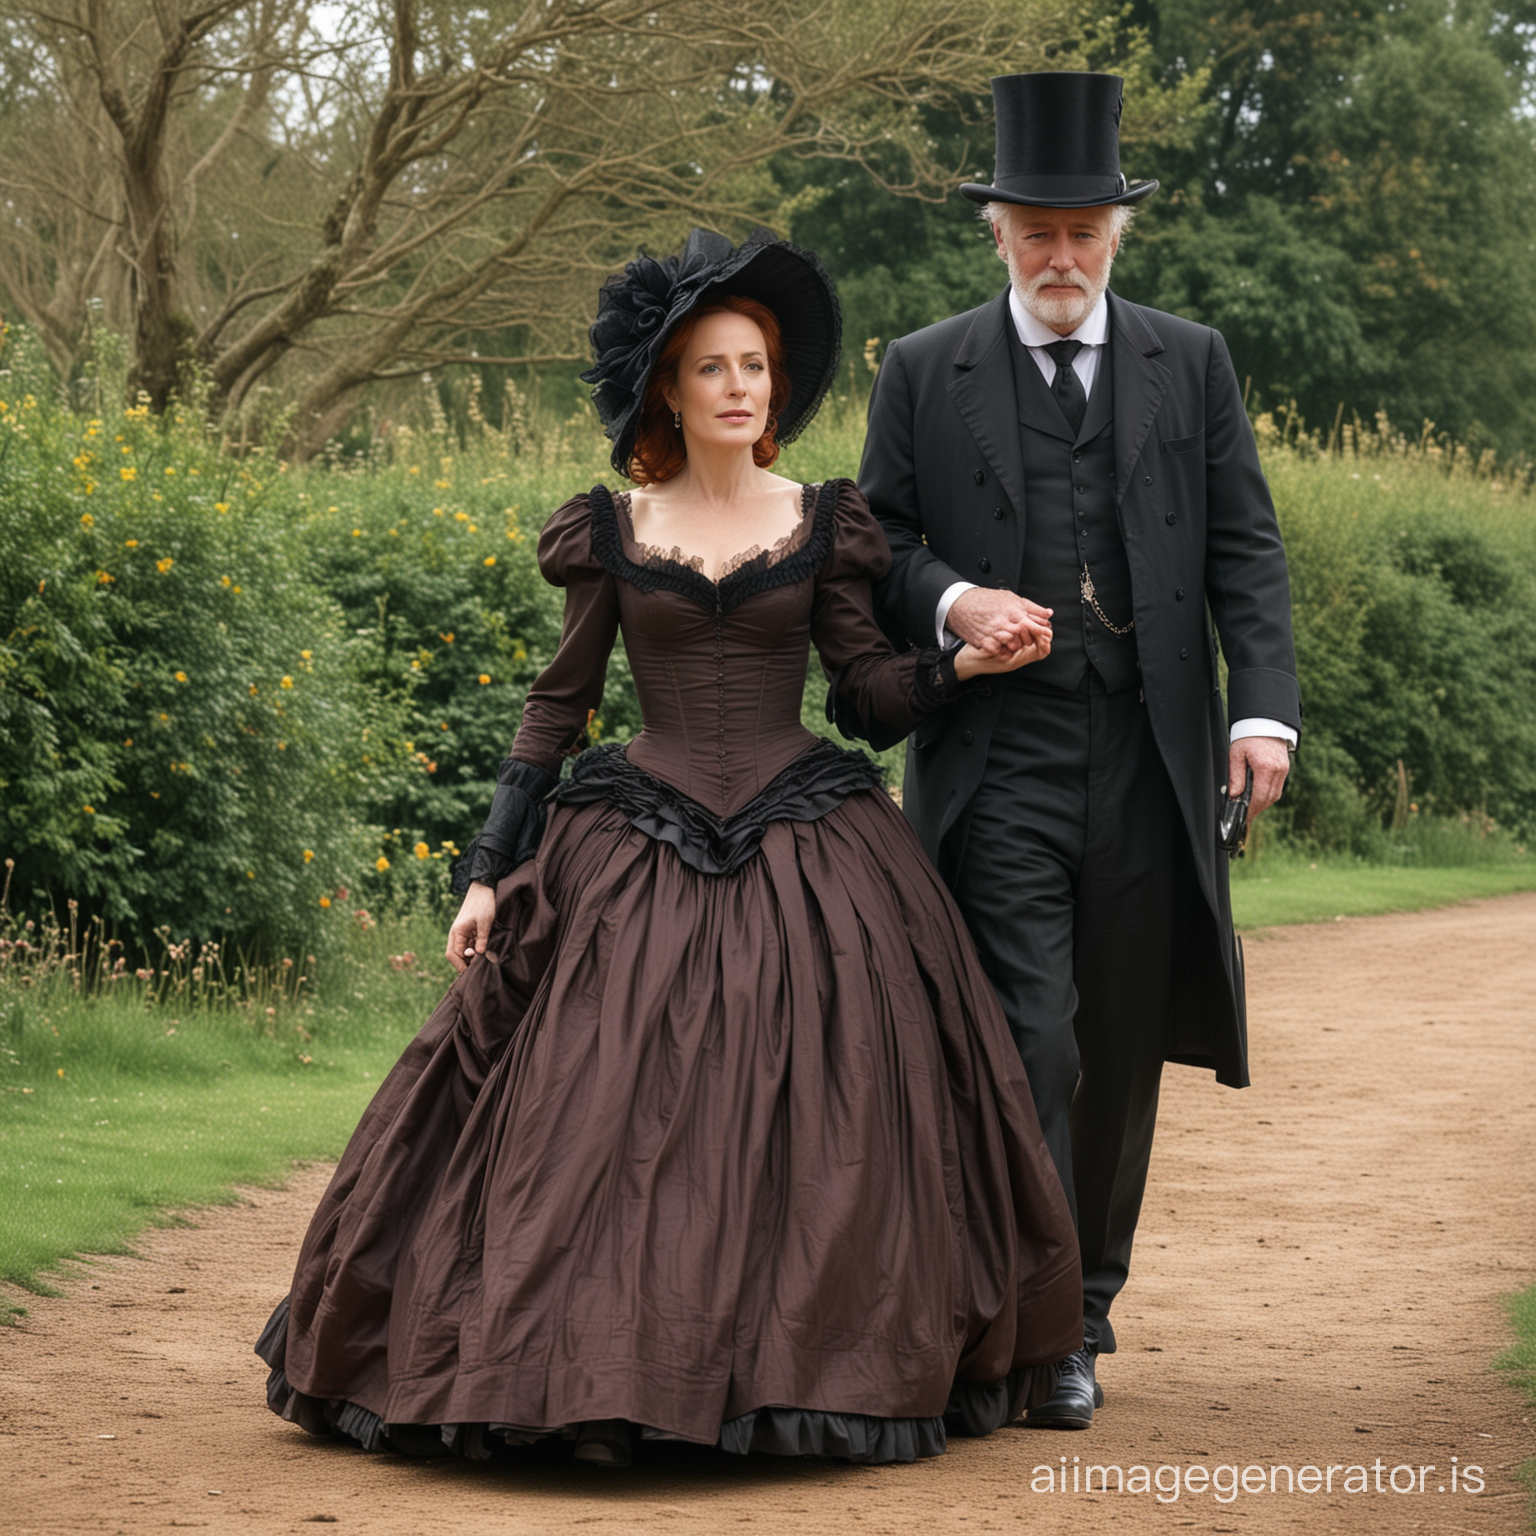 red hair Gillian Anderson wearing a dark brown floor-length loose billowing 1860 victorian crinoline poofy dress with a frilly bonnet strolling hand in hand with an old man dressed into a black victorian suit who seems to be her newlywed husband
